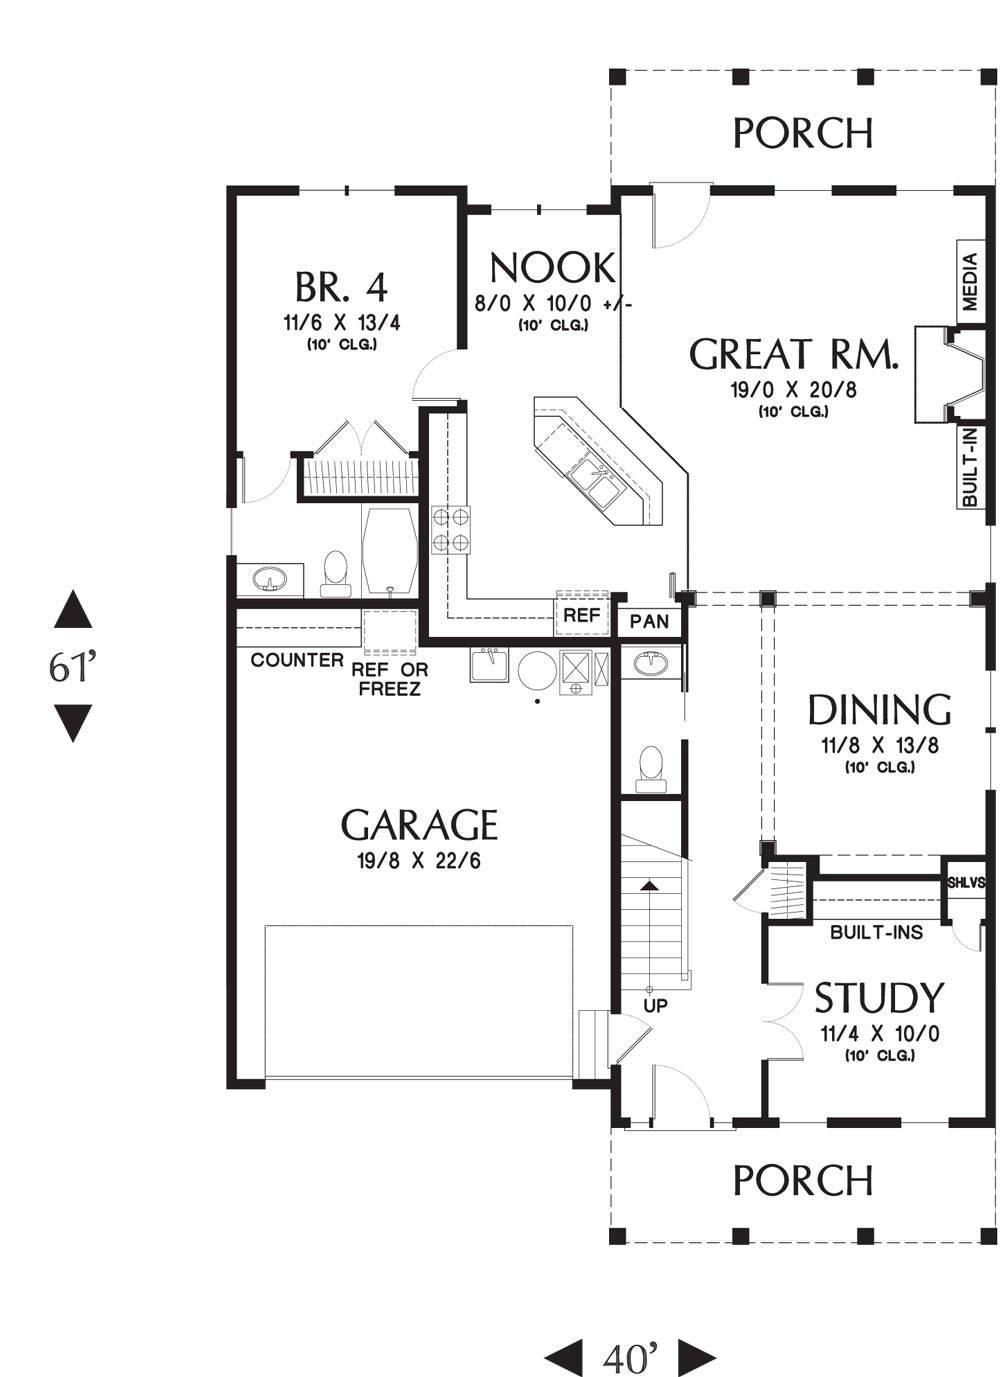 Norfolk 4064 4 Bedrooms and 3 Baths The House Designers